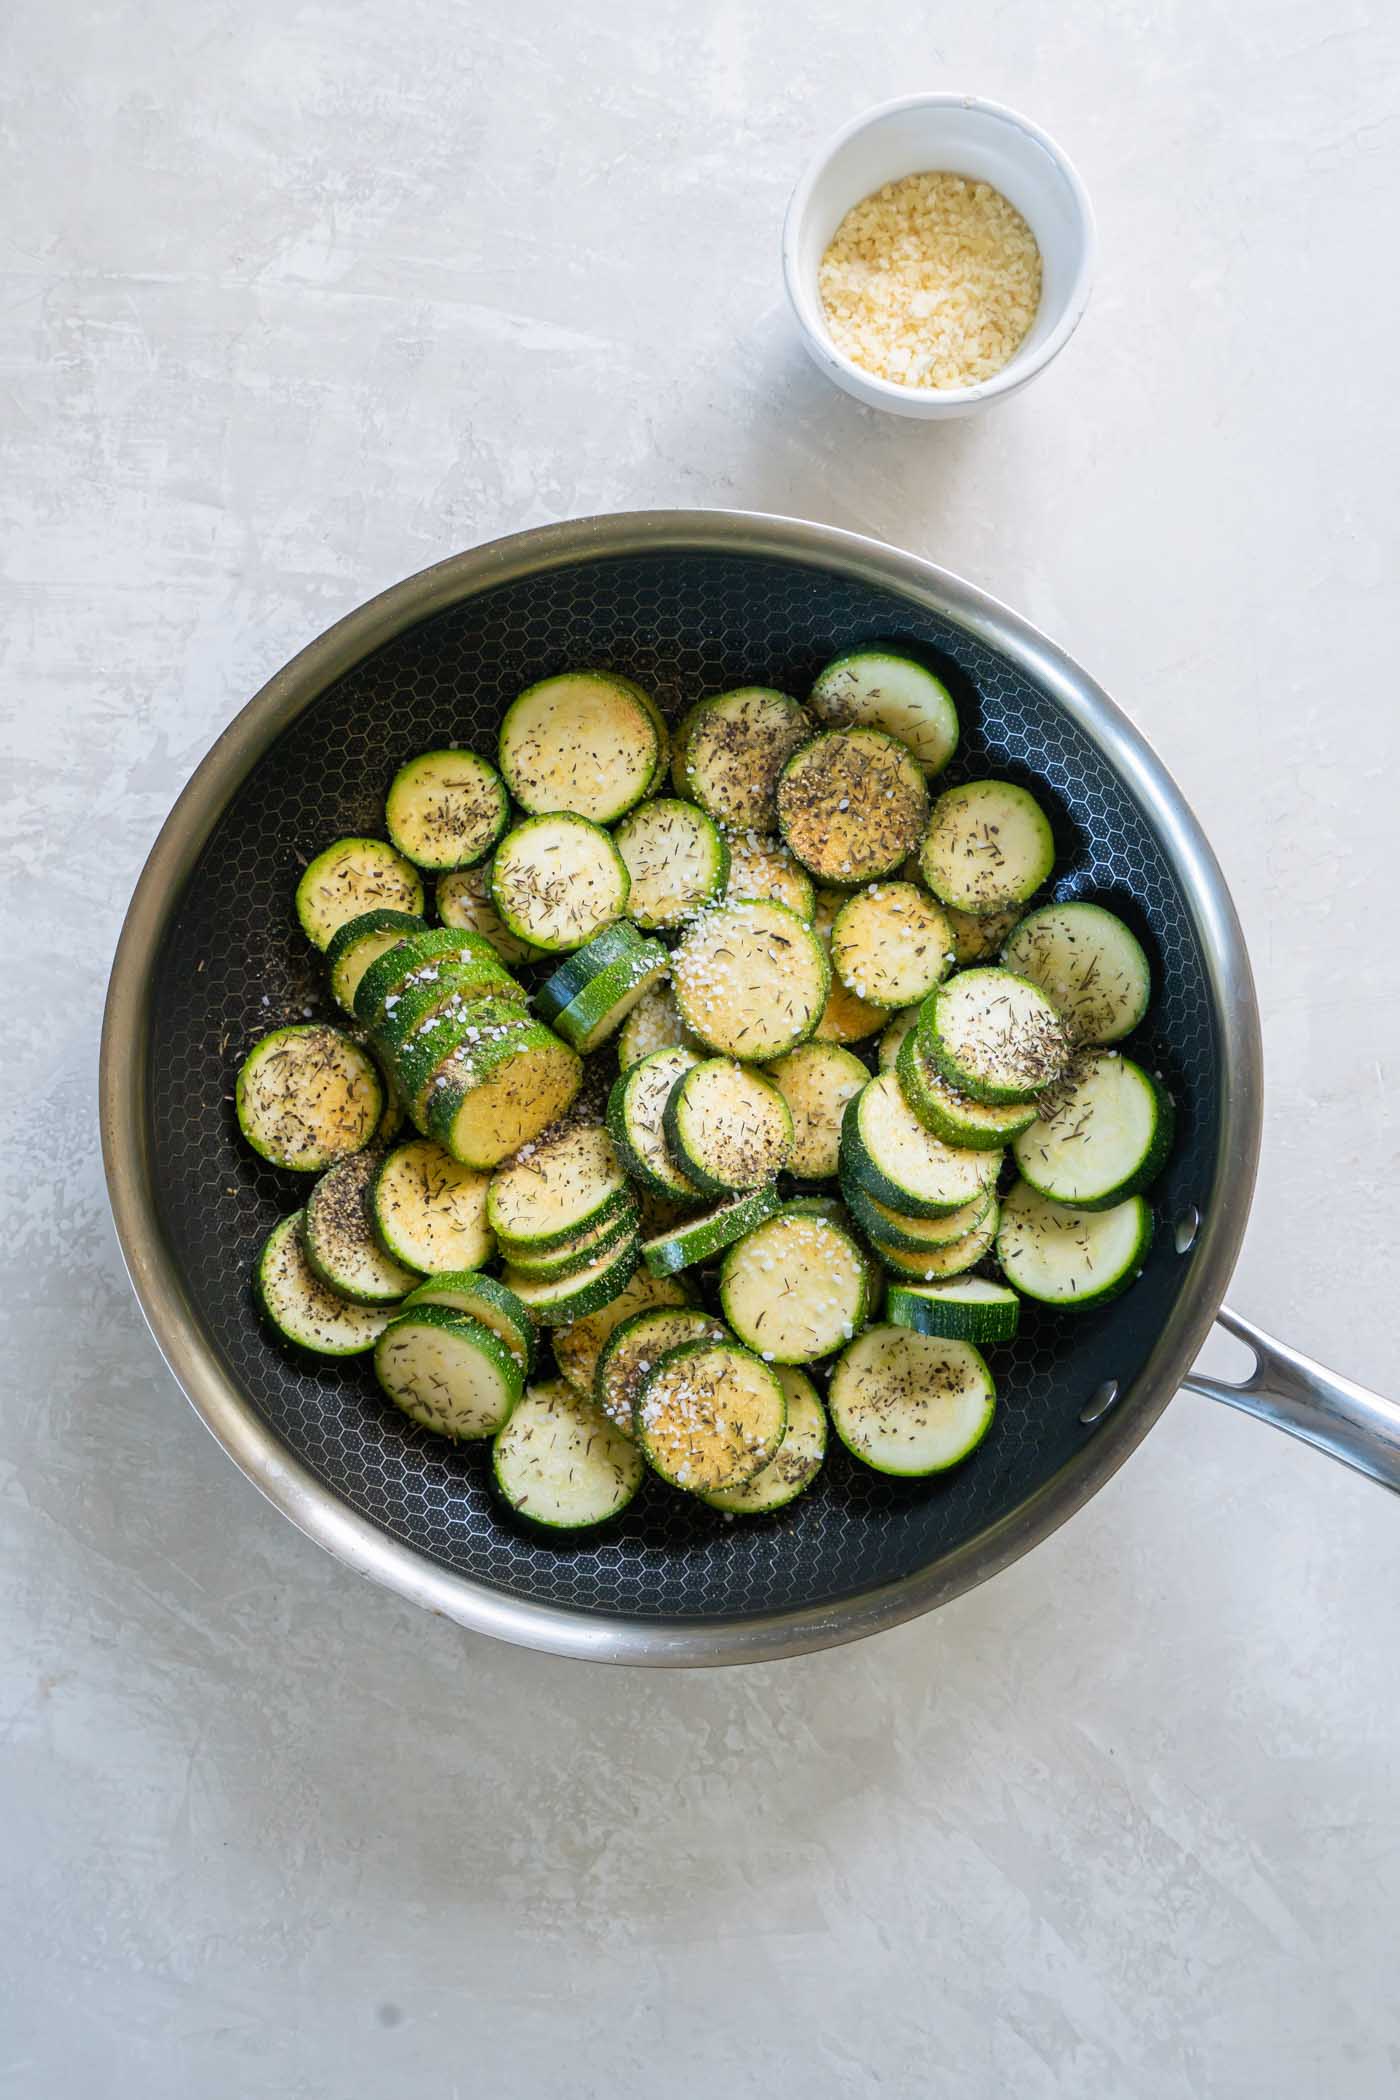 Zucchini rounds with seasonings sprinkled over them in skillet.